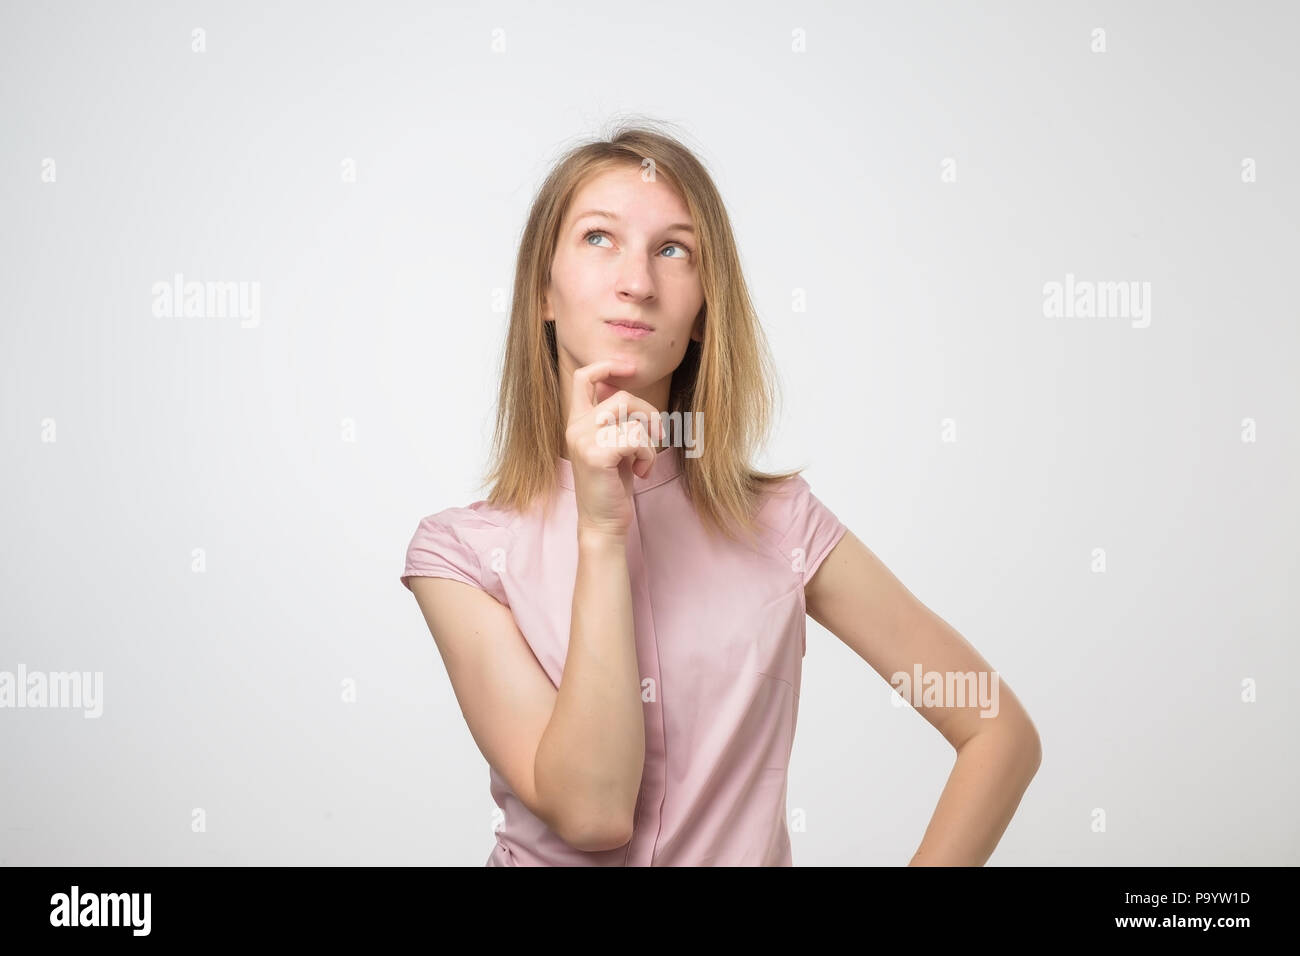 young pensive caucasian woman over white background Stock Photo